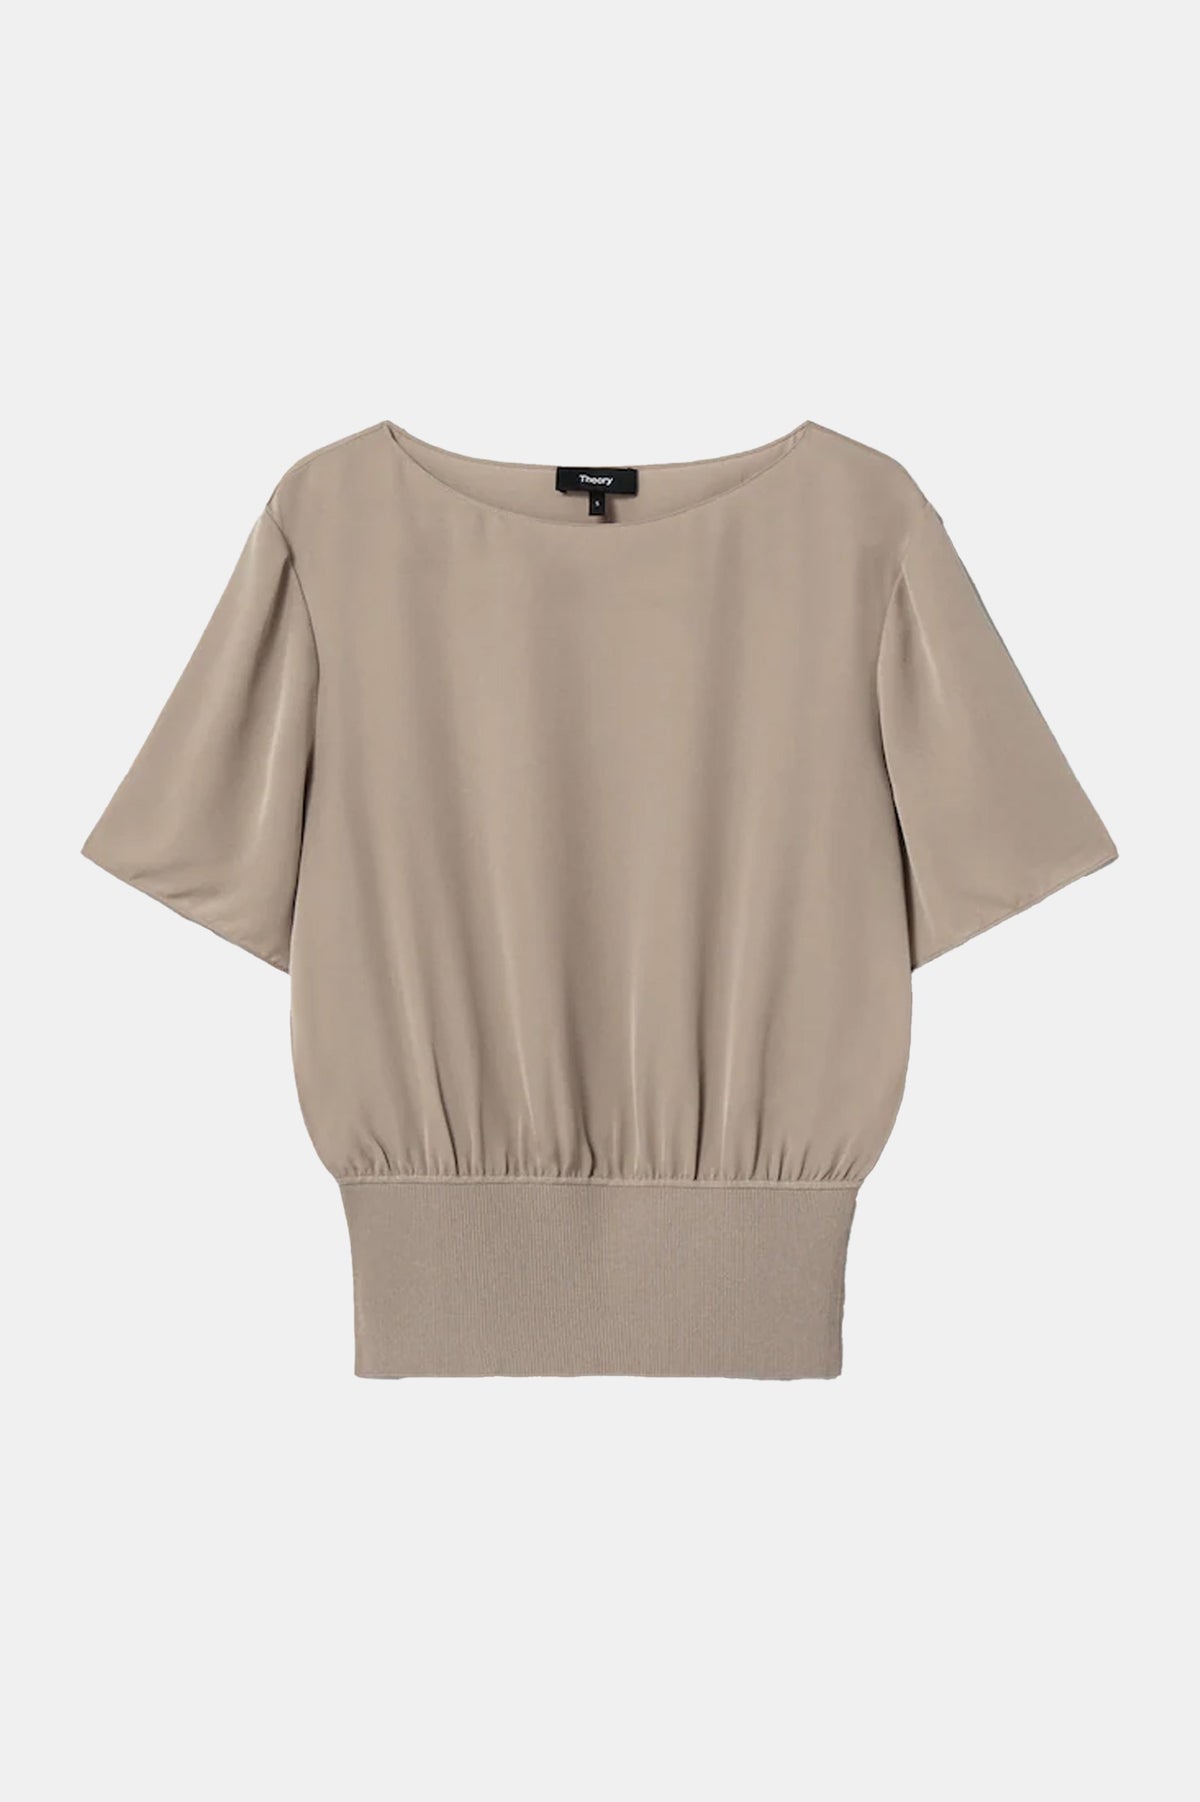 Ribbed Waist Silk Top in Taupe